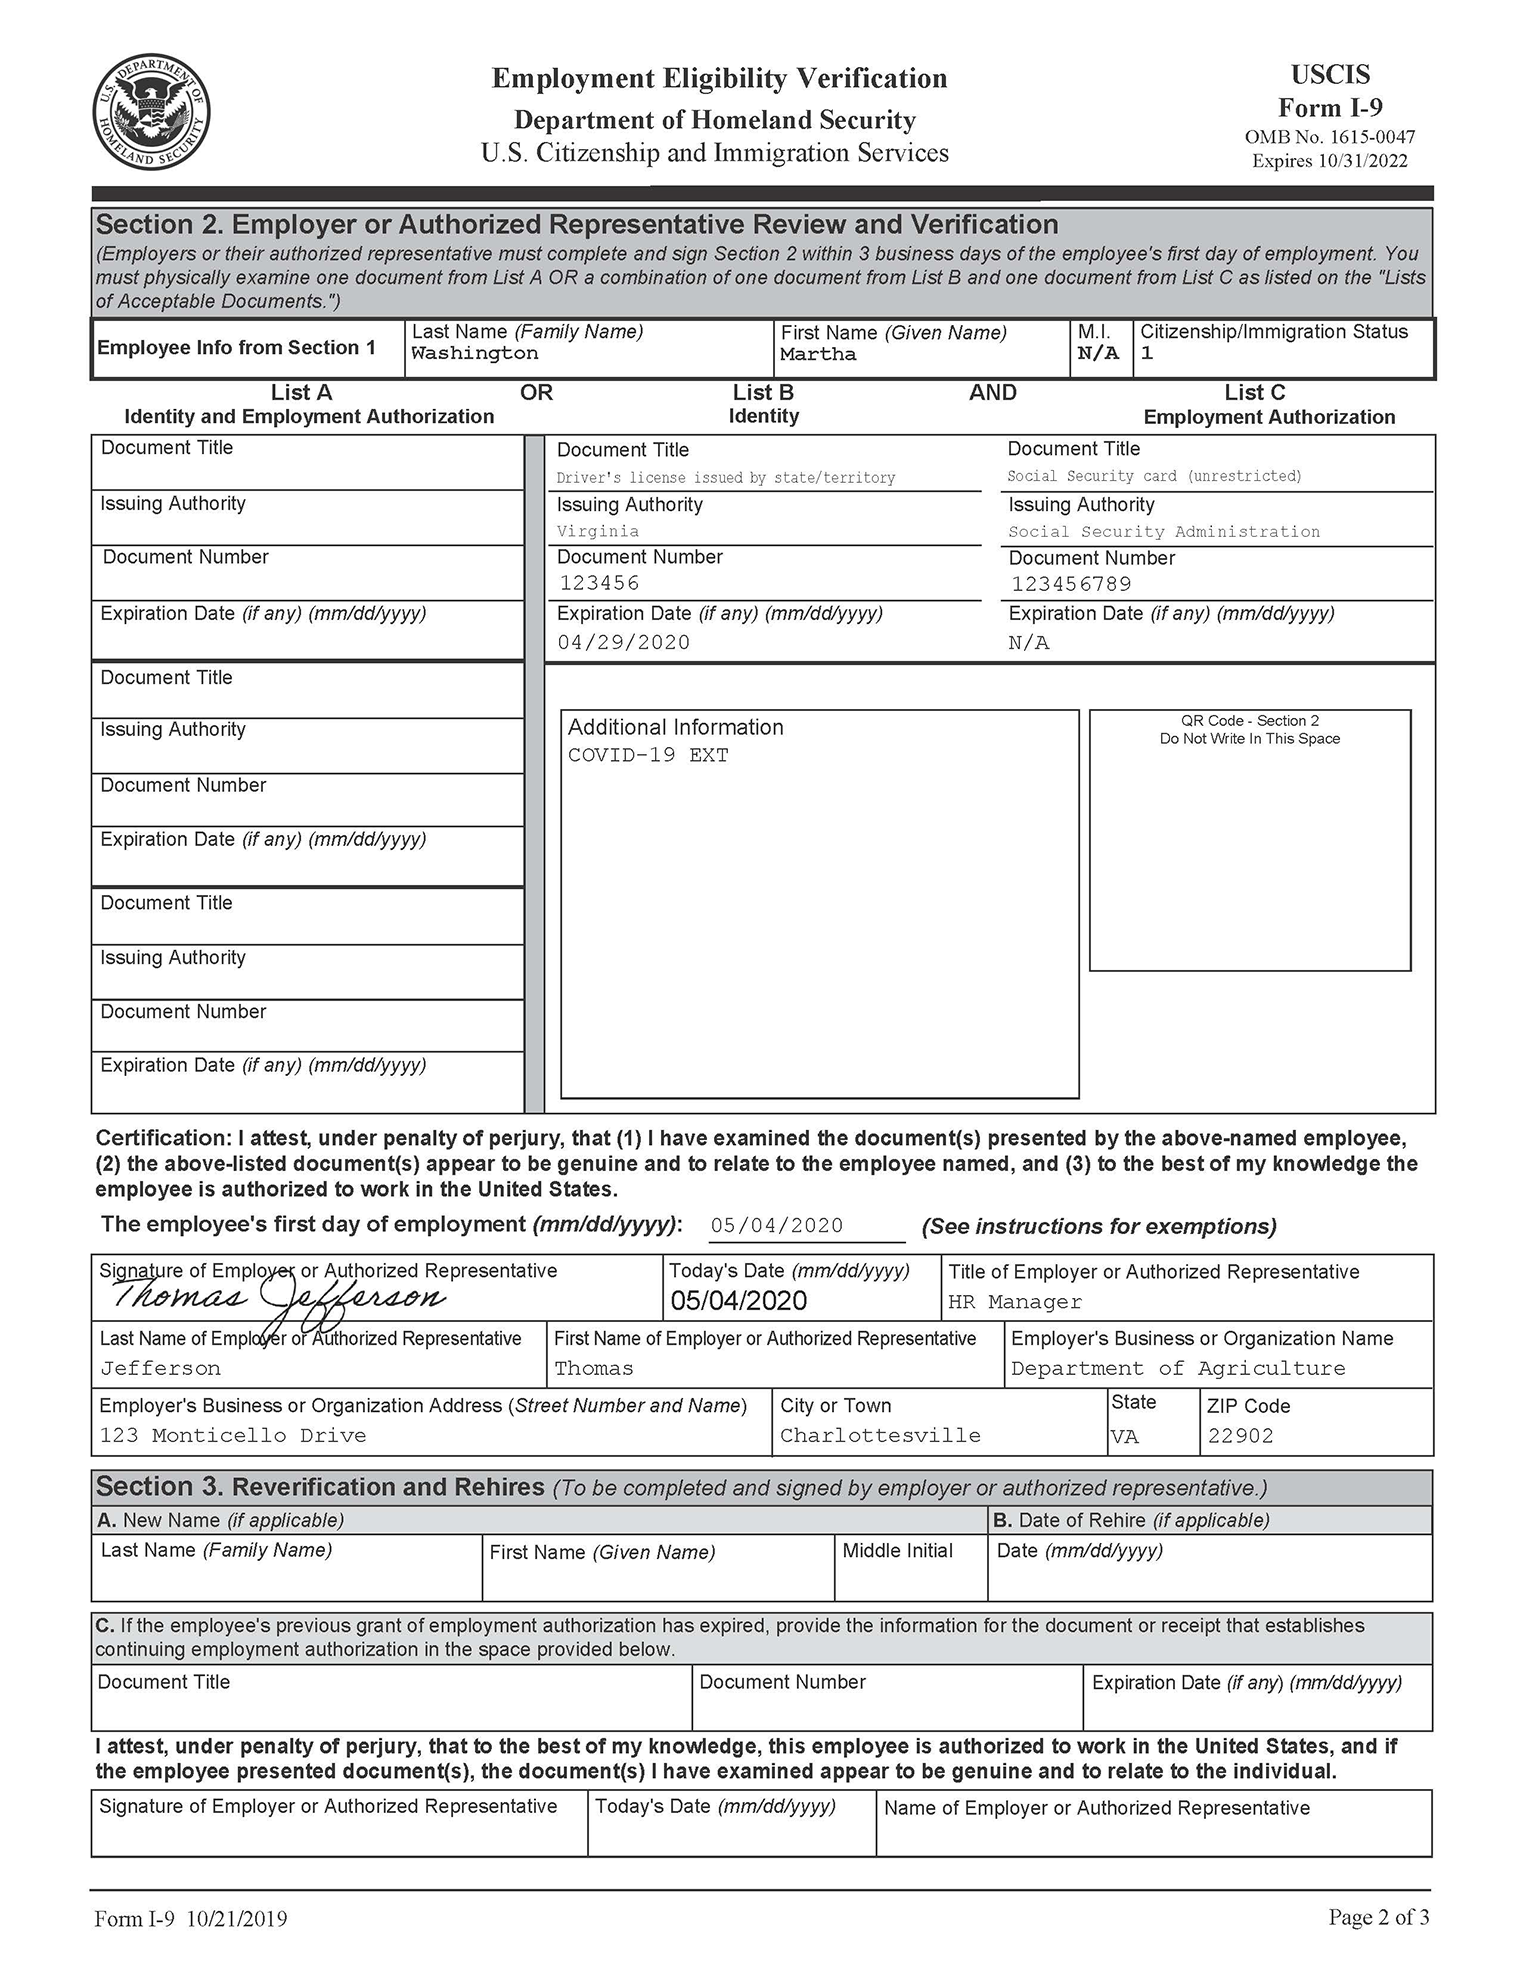 Form I 9 Examples Related To Temporary Covid 19 Policies Uscis